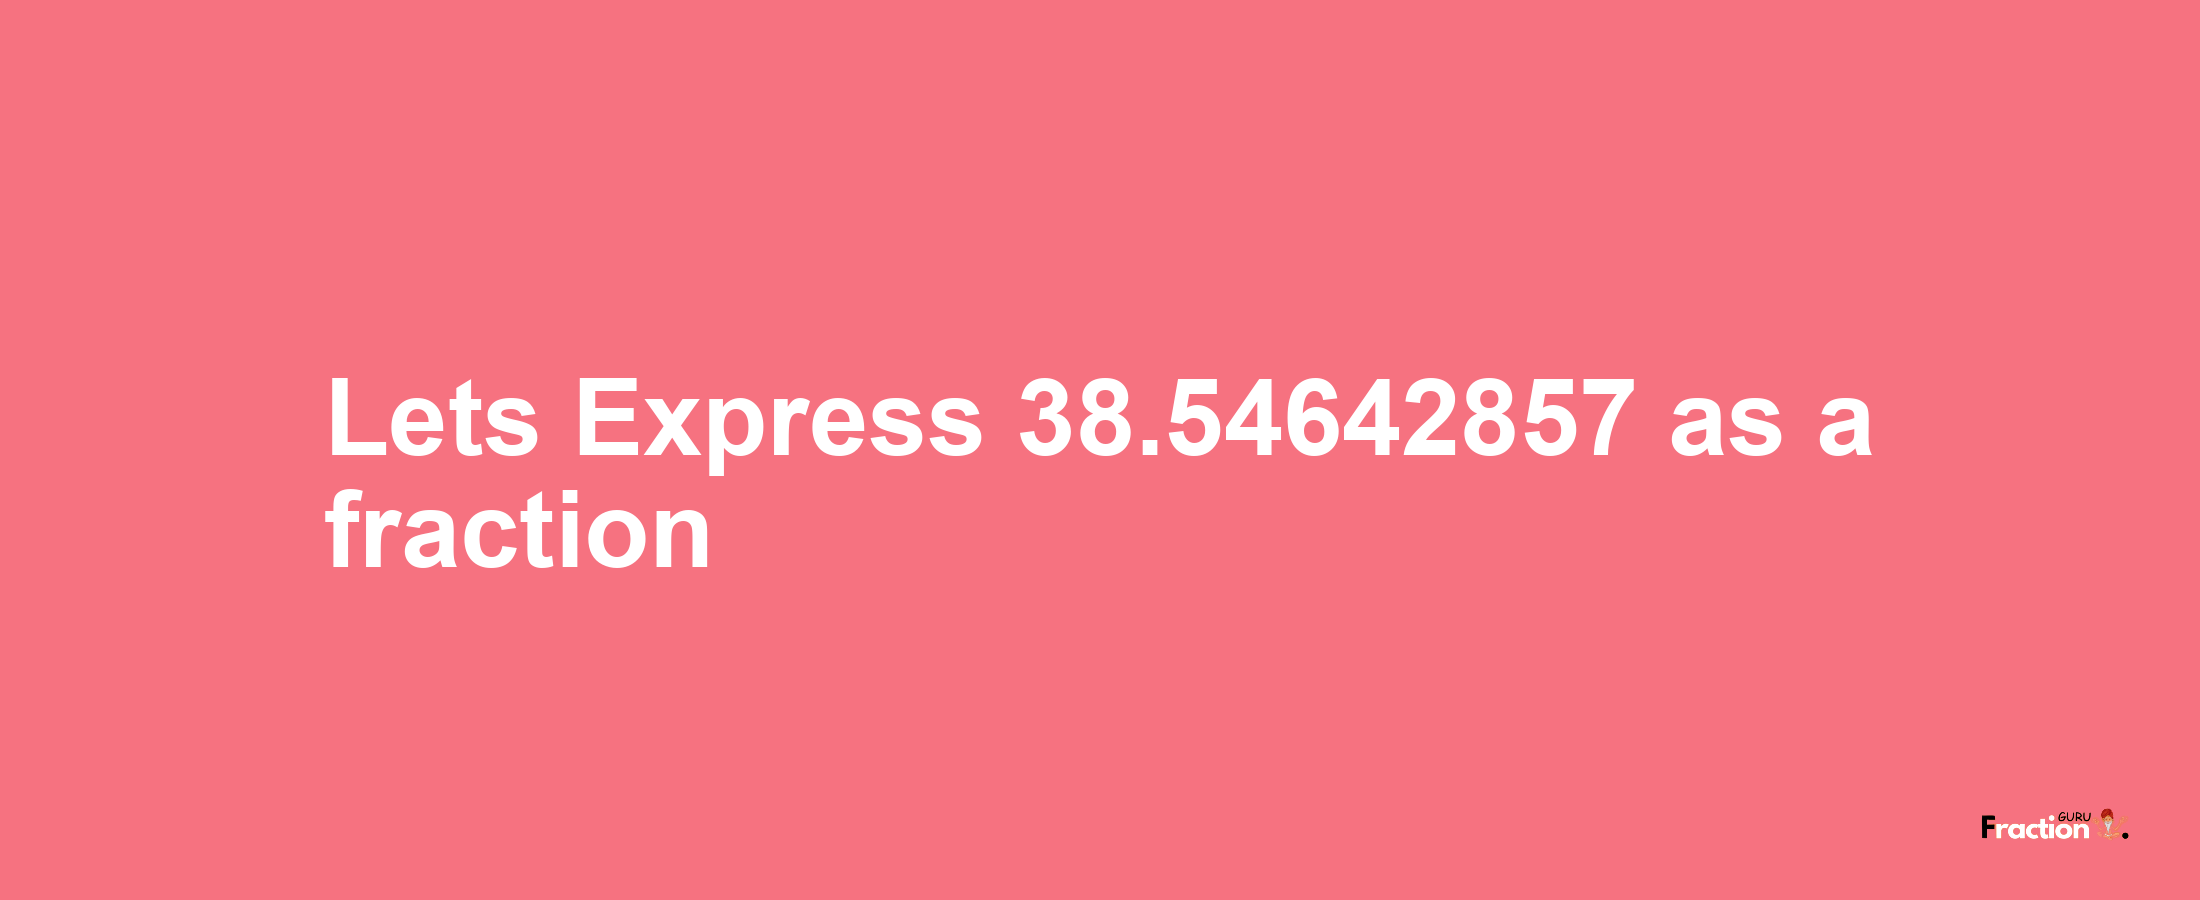 Lets Express 38.54642857 as afraction